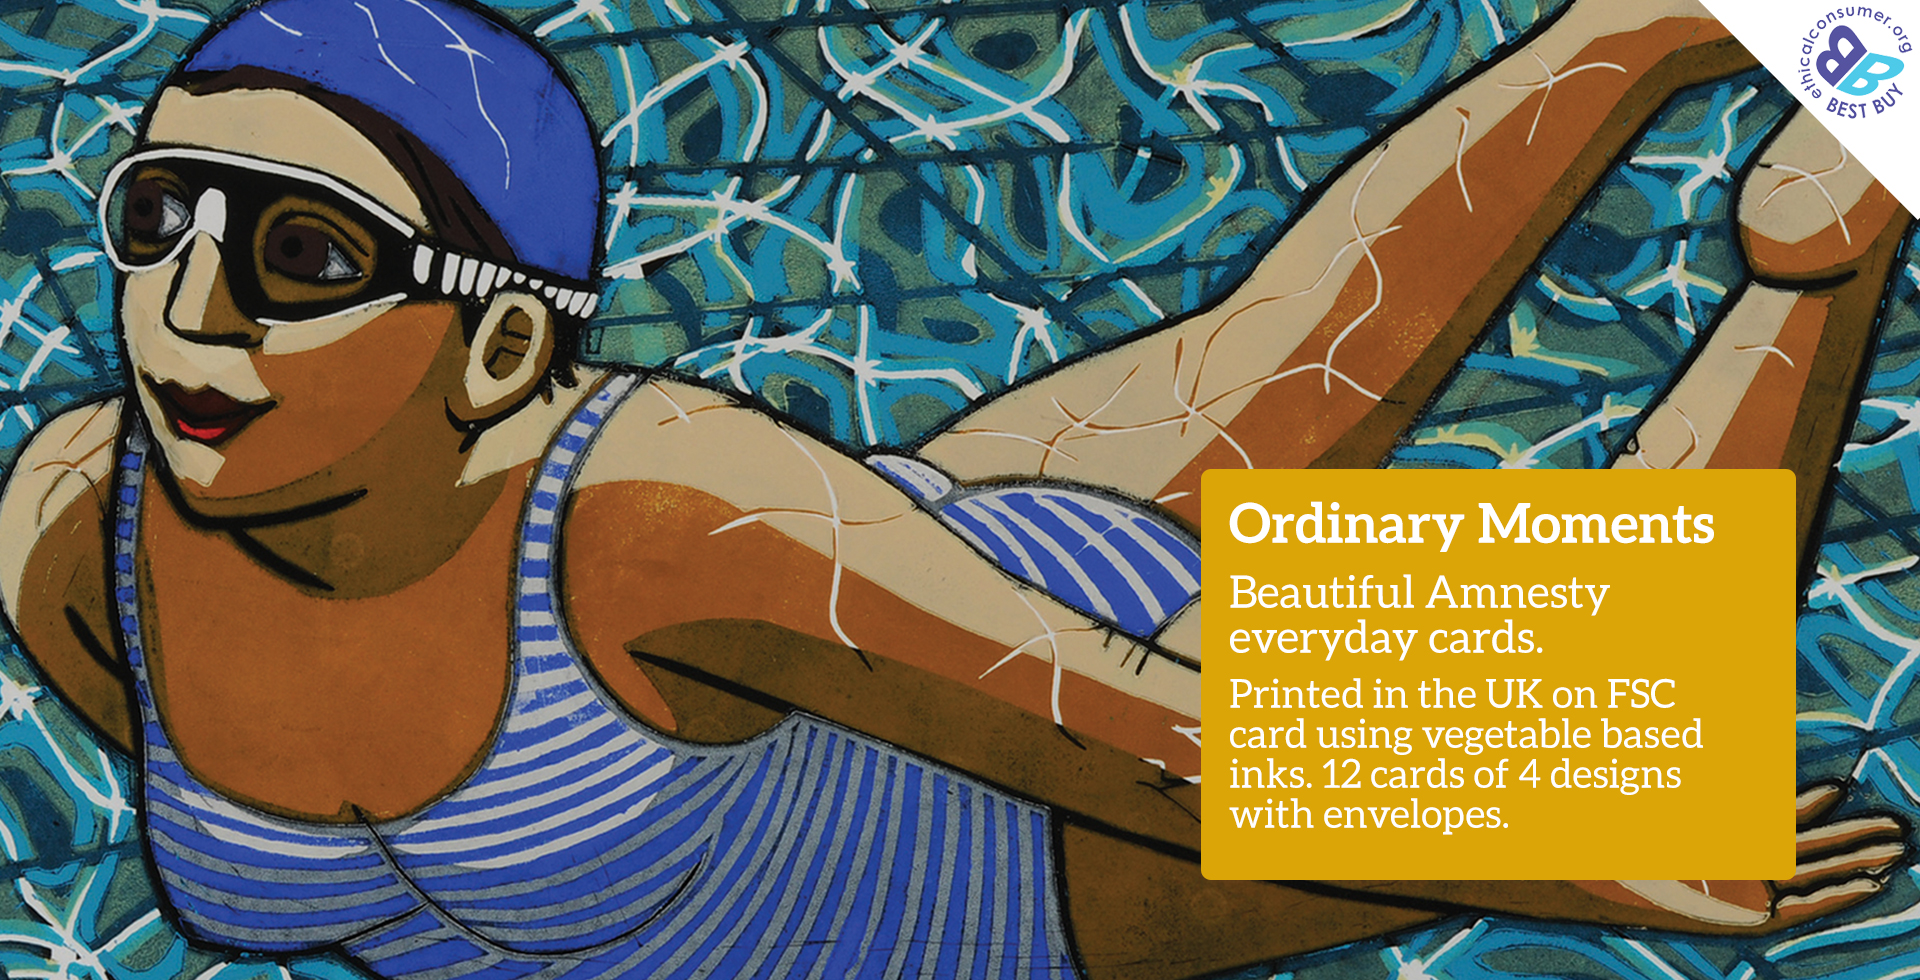 Amnesty Ordinary Moments Cards